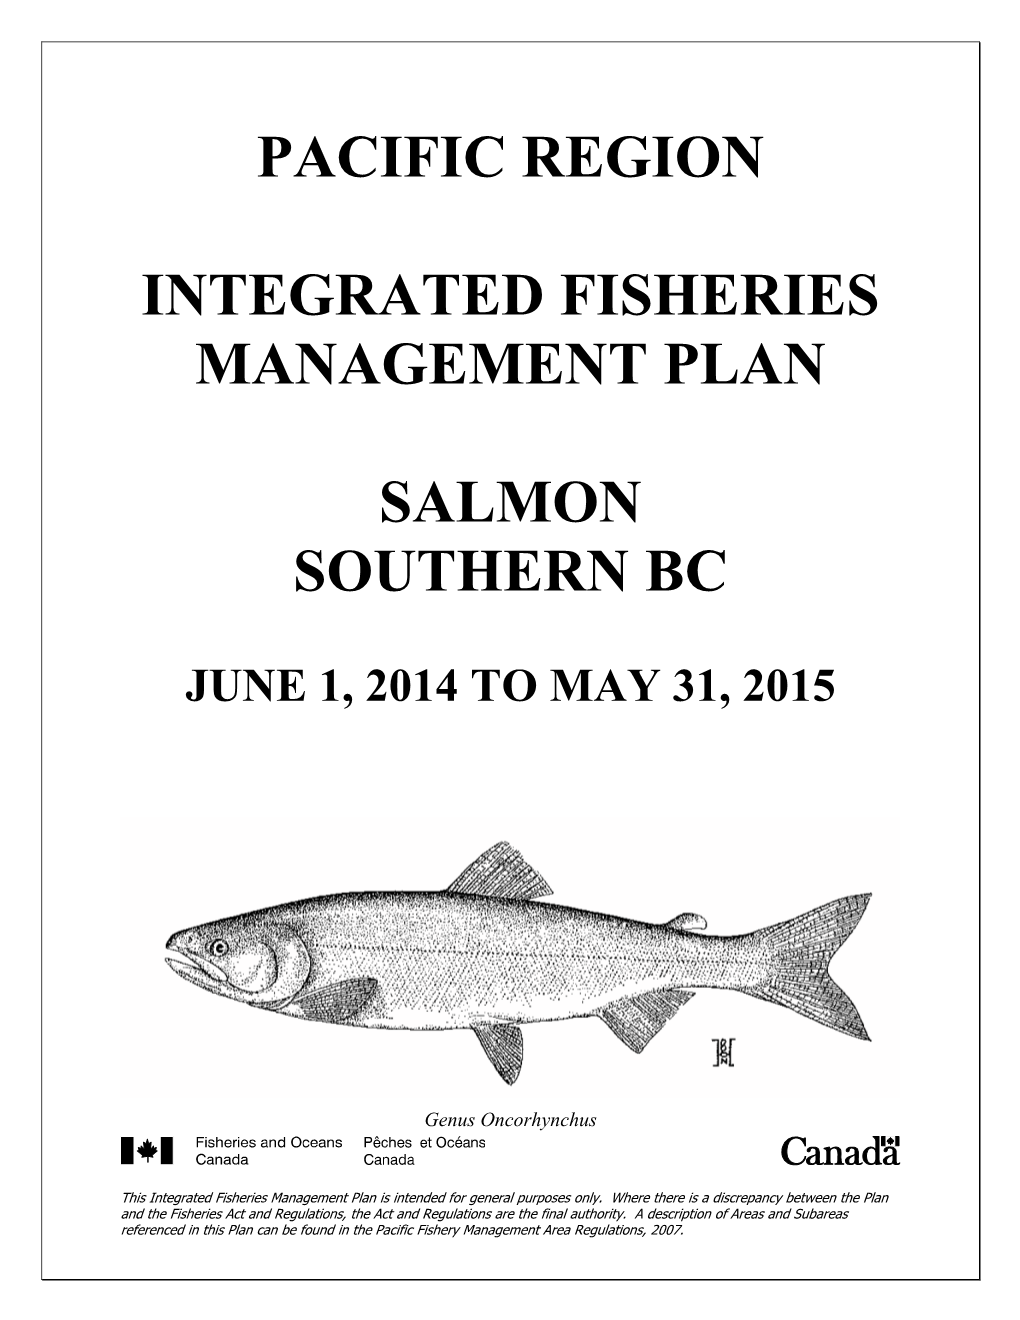 Pacific Region Integrated Fisheries Management Plan Salmon Southern Bc